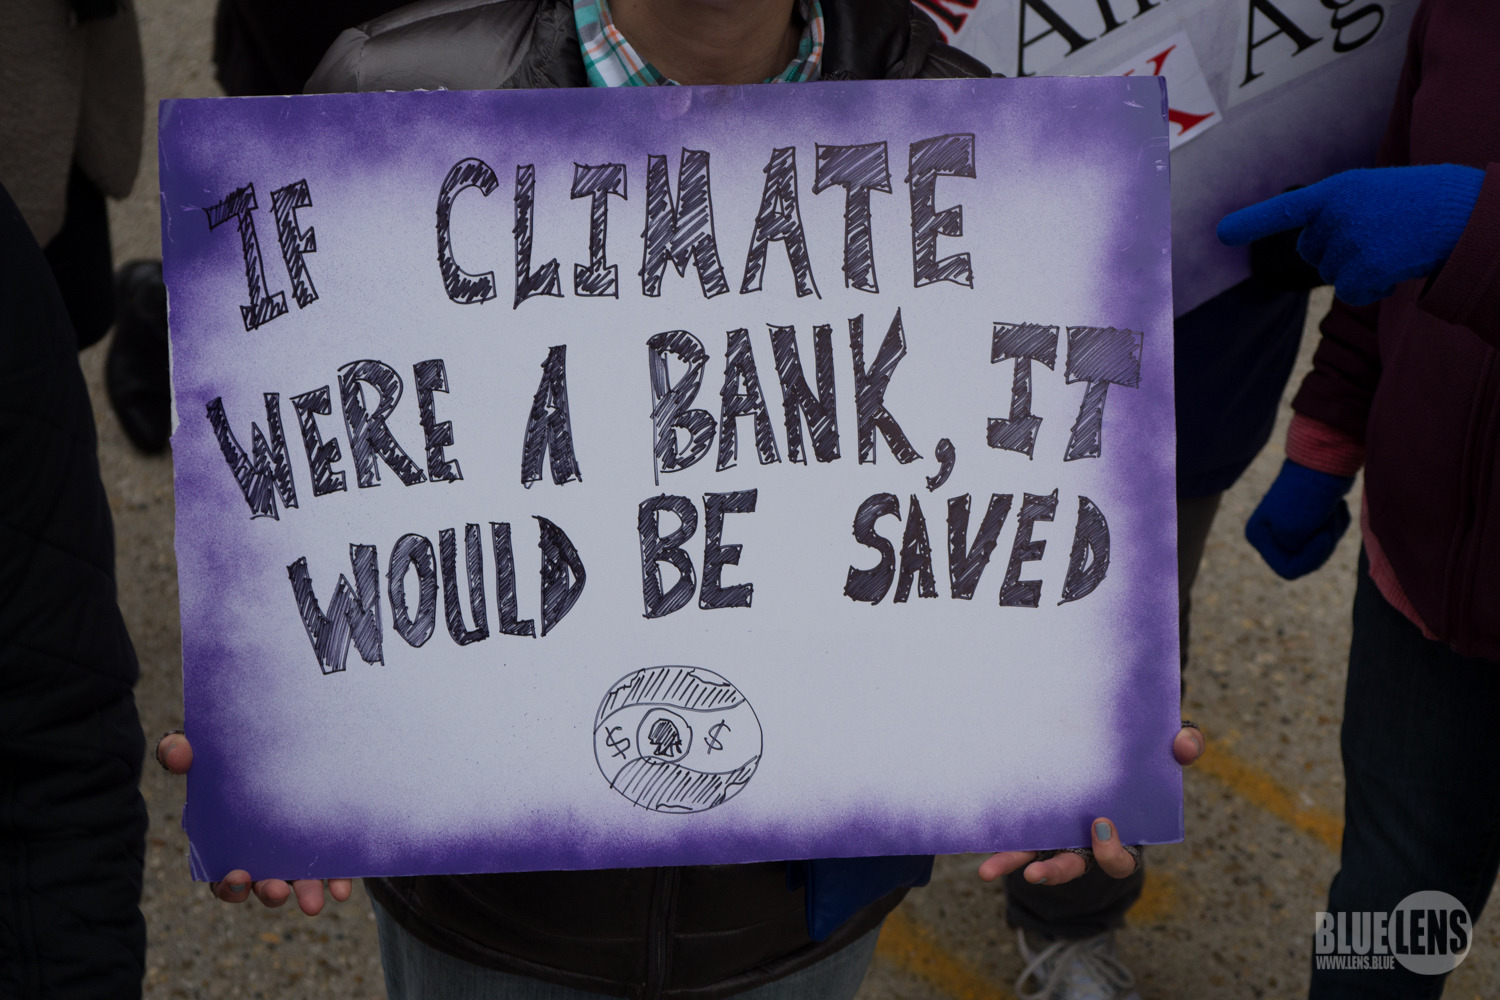 "If the climate were a bank, it would be saved," protest sign from the Women's March. Image: Wikimedia Commons/Mark Dixon